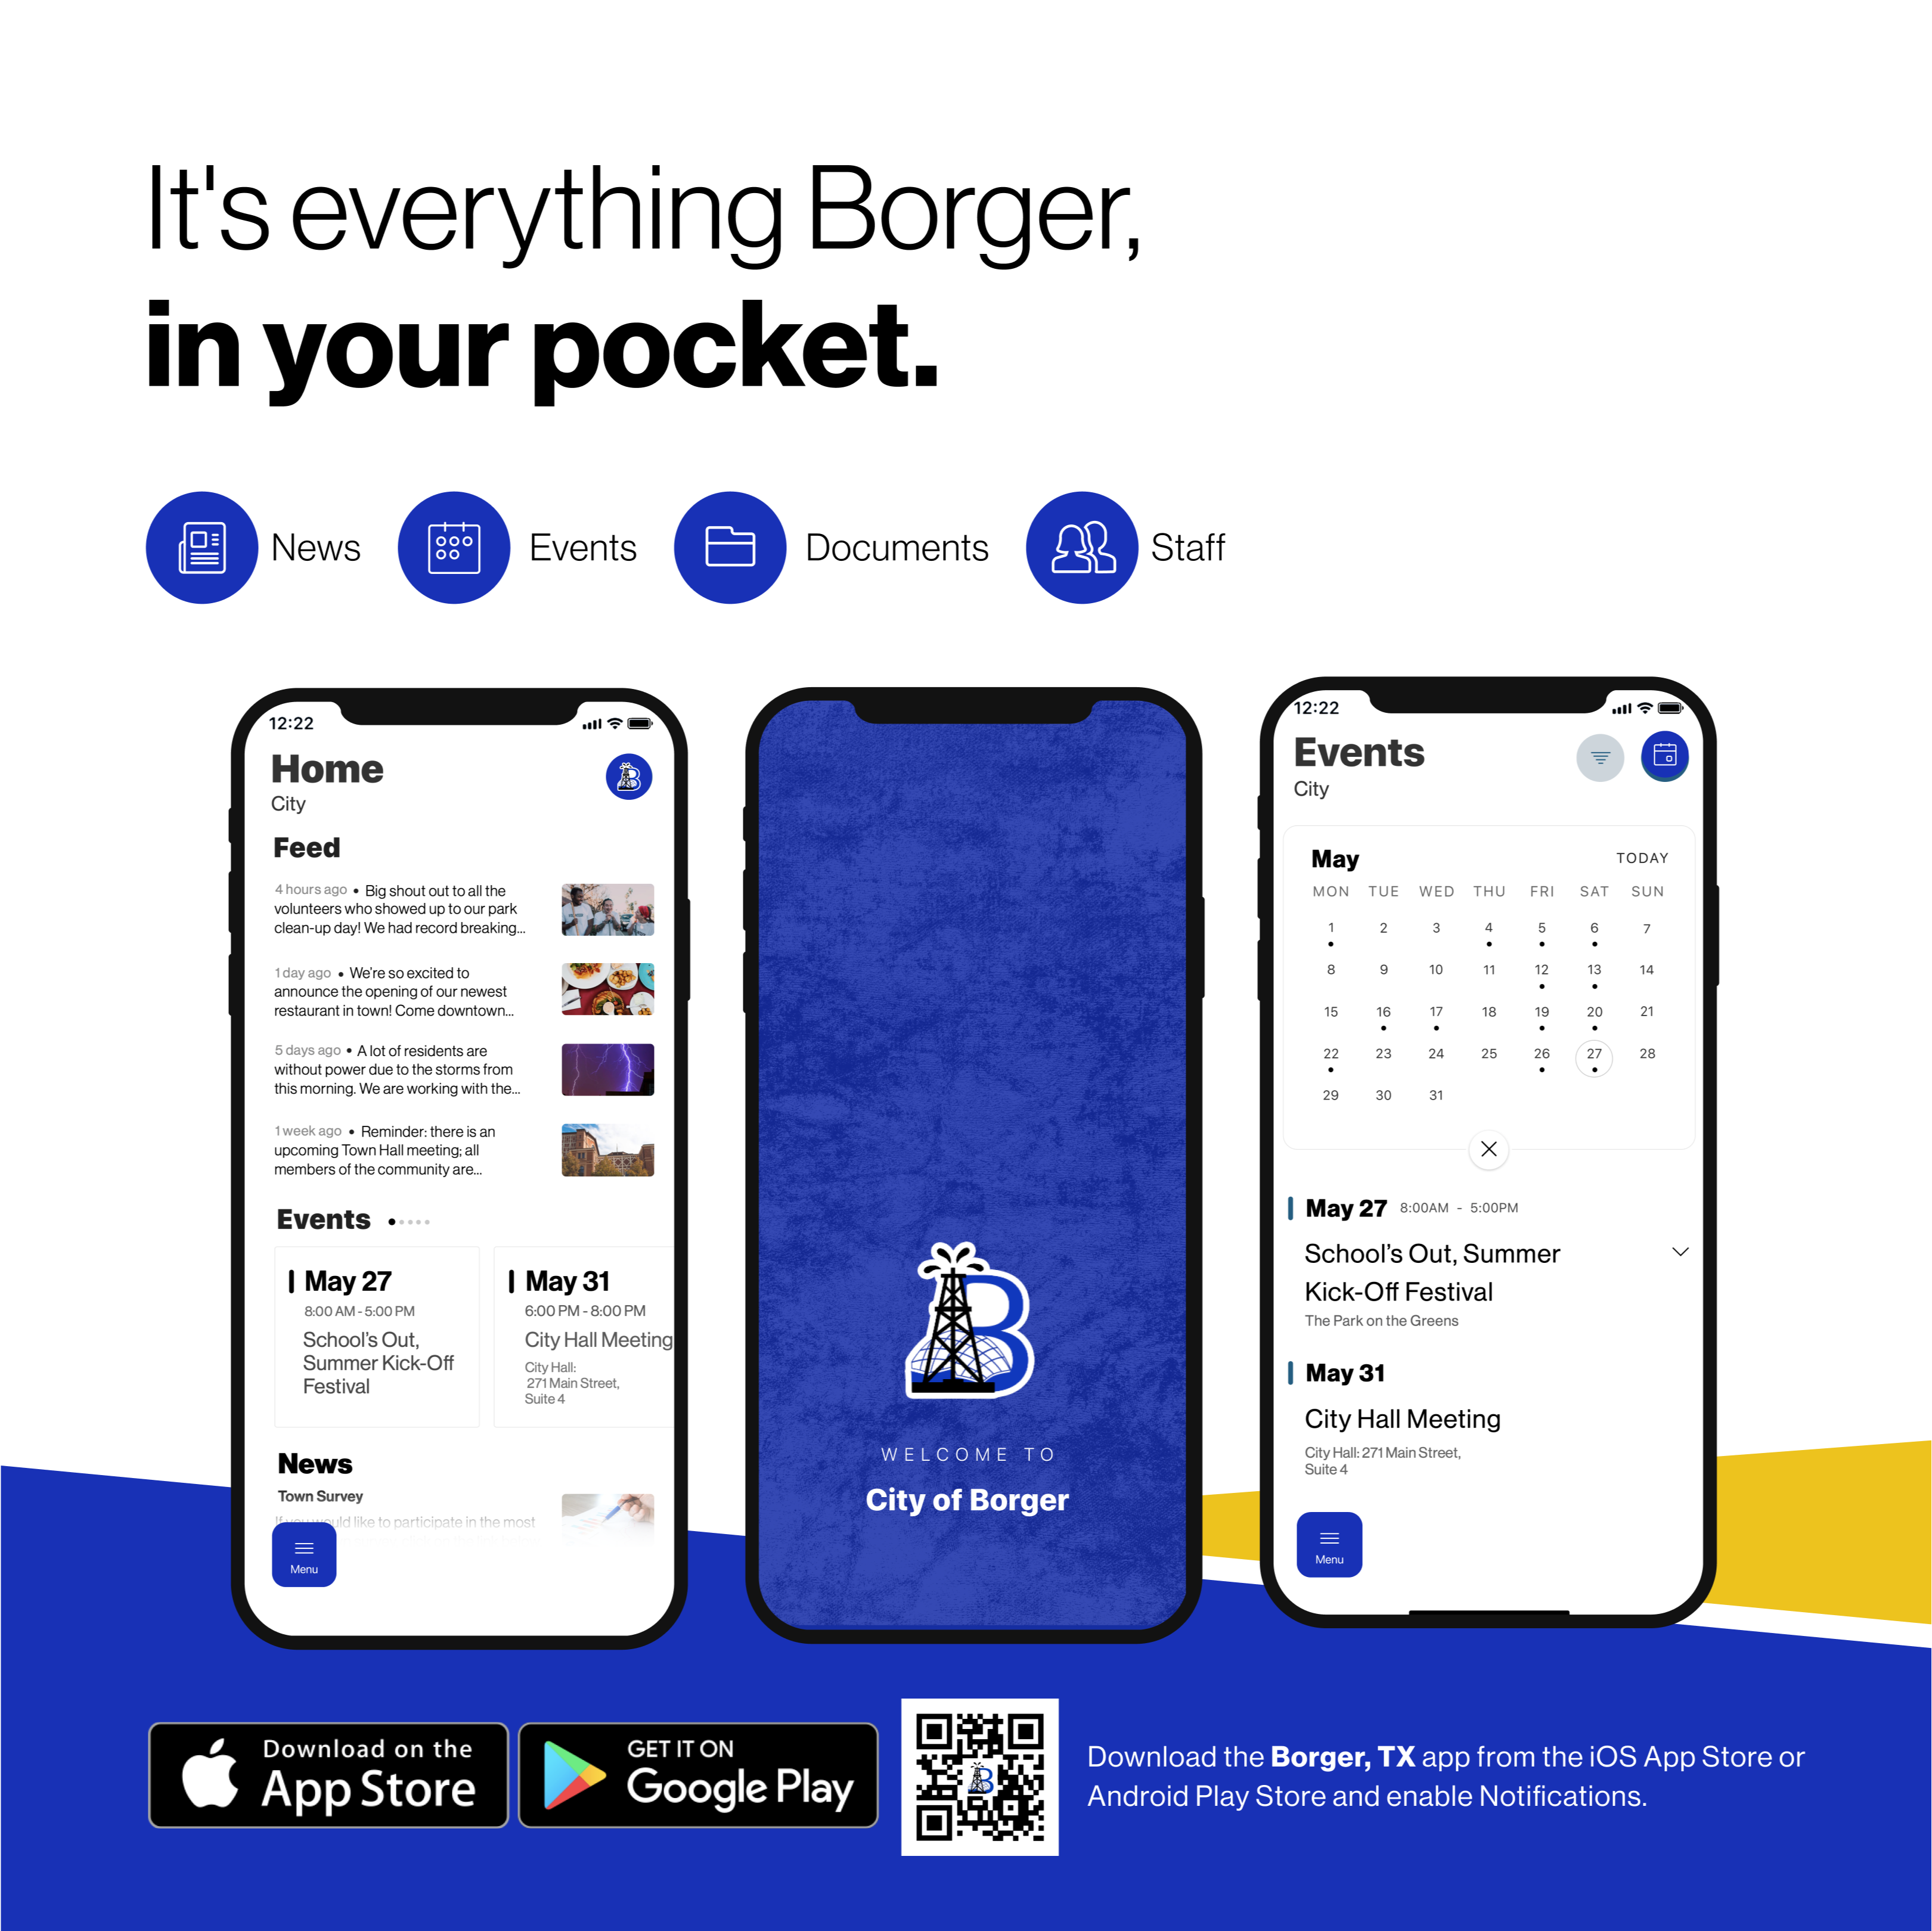 Its everything Borger in your pocket marketing poster